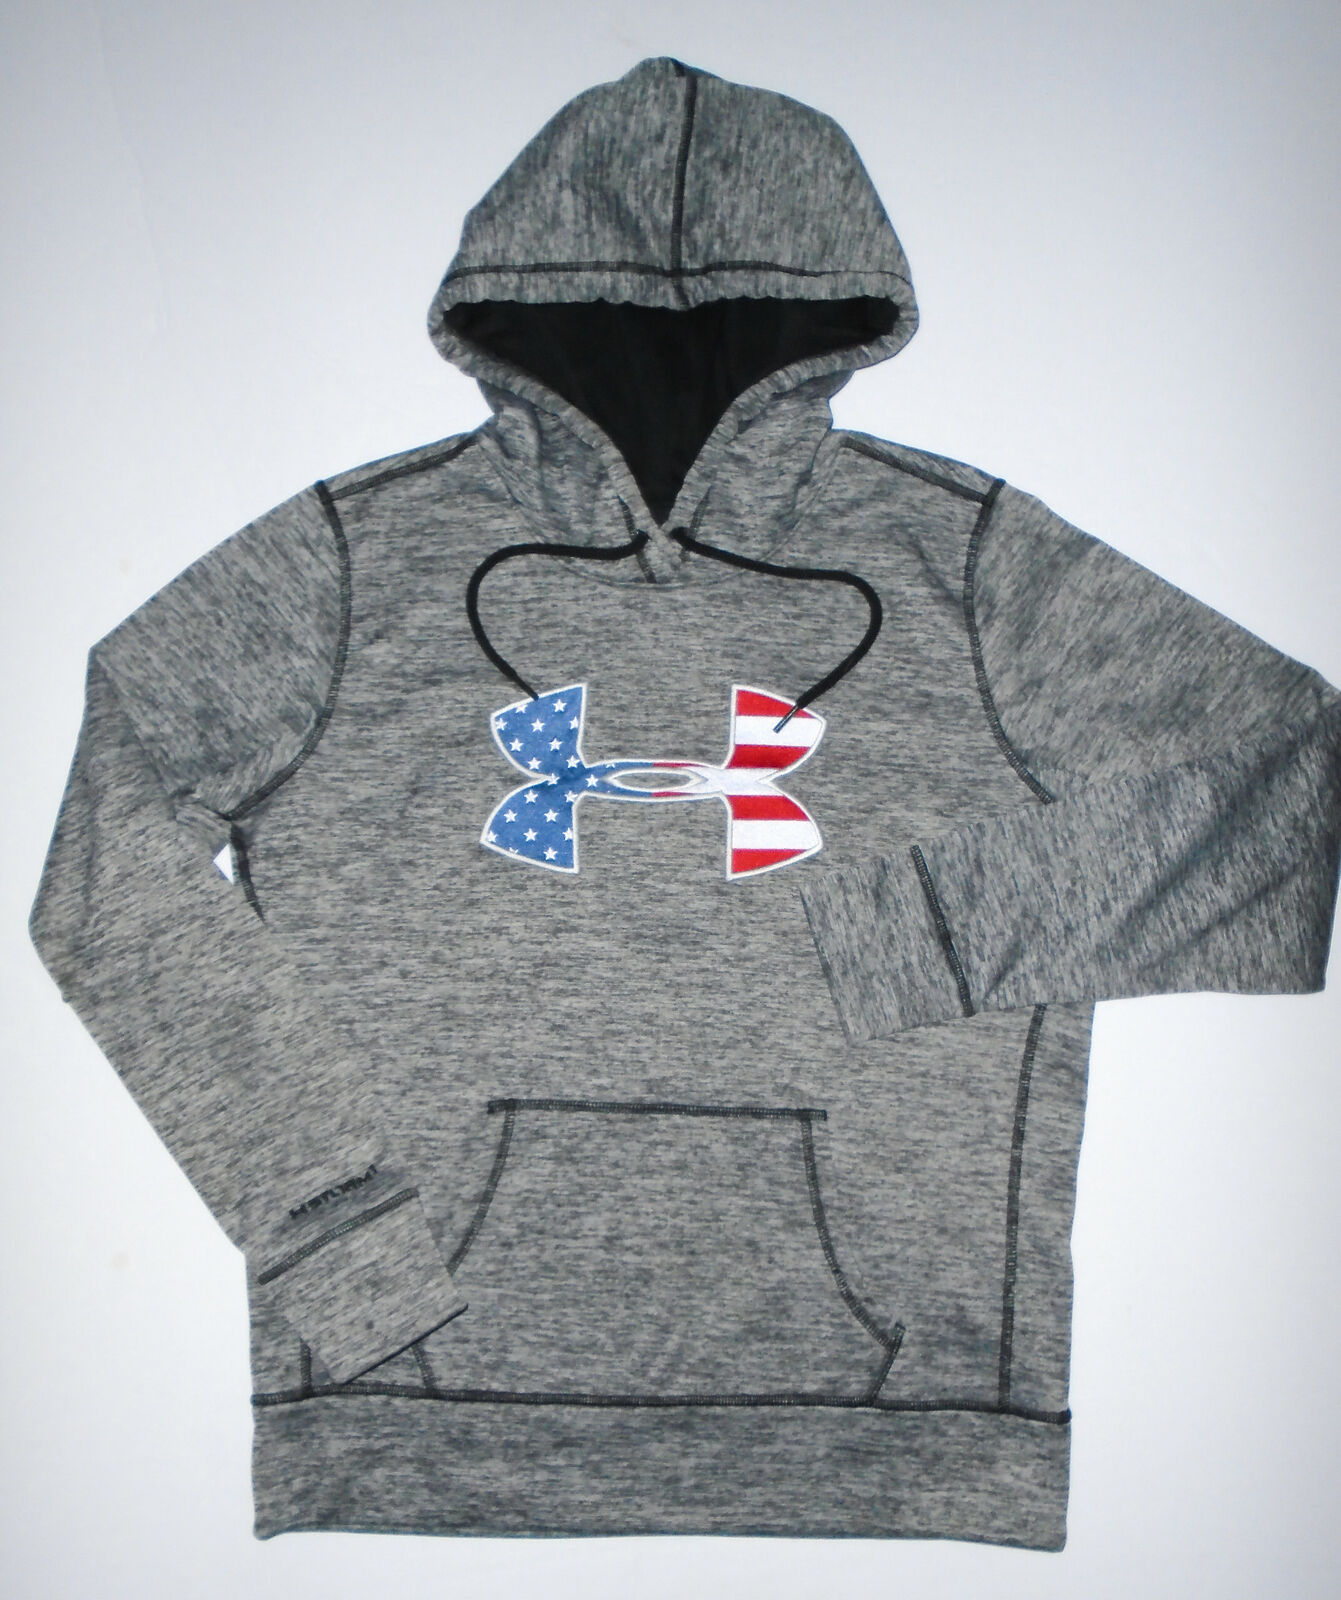 UNDER ARMOUR Pullover STORM 1 Hoodie Sweatshirt GRAY USA Flag Patriotic NEW Md